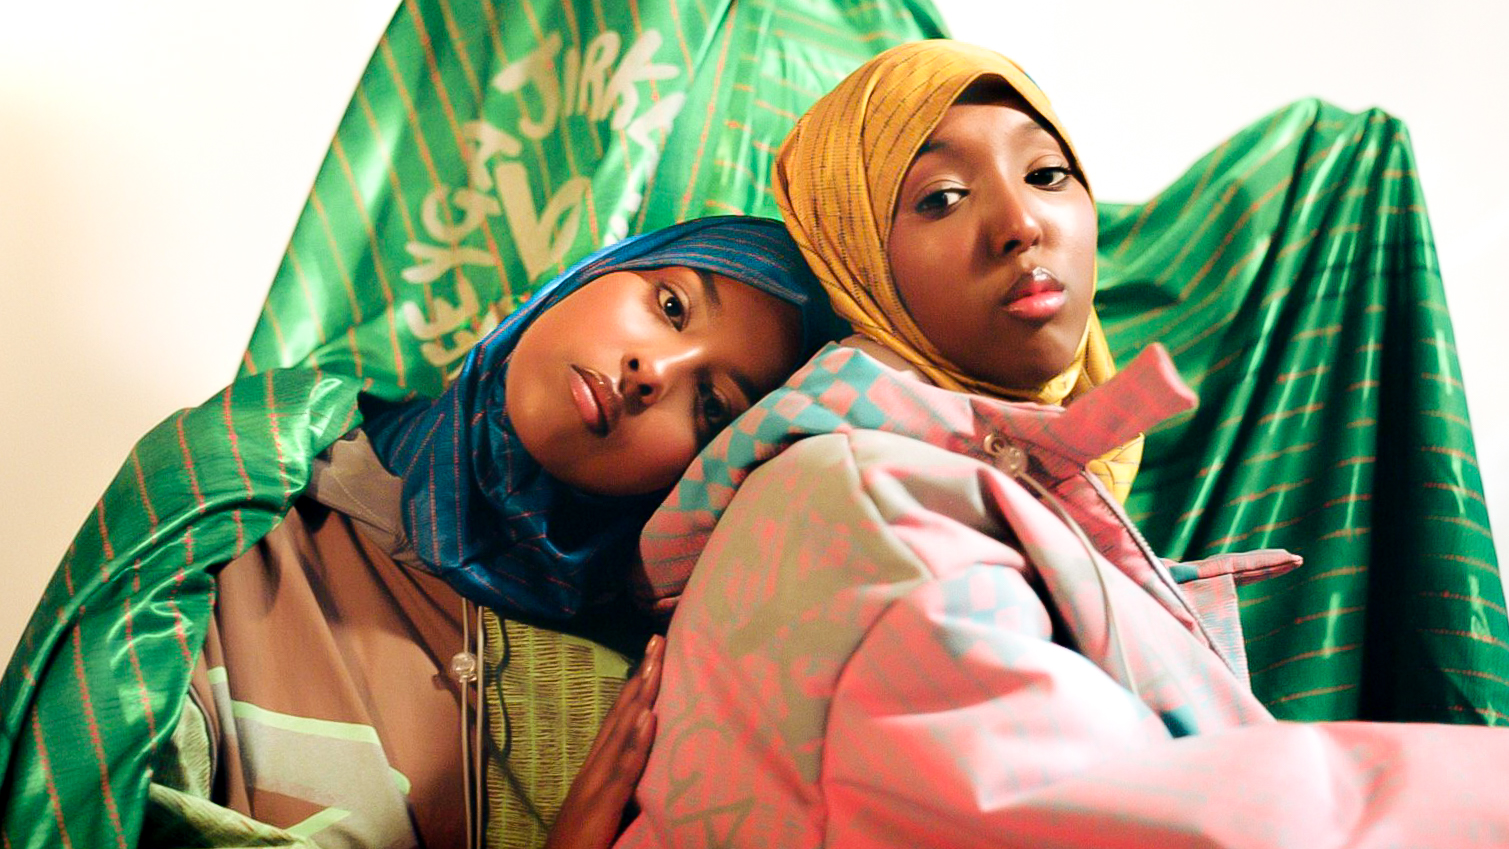 Yasmin Ibrahim Protests FGM Practices In Her Modest Streetwear Collection